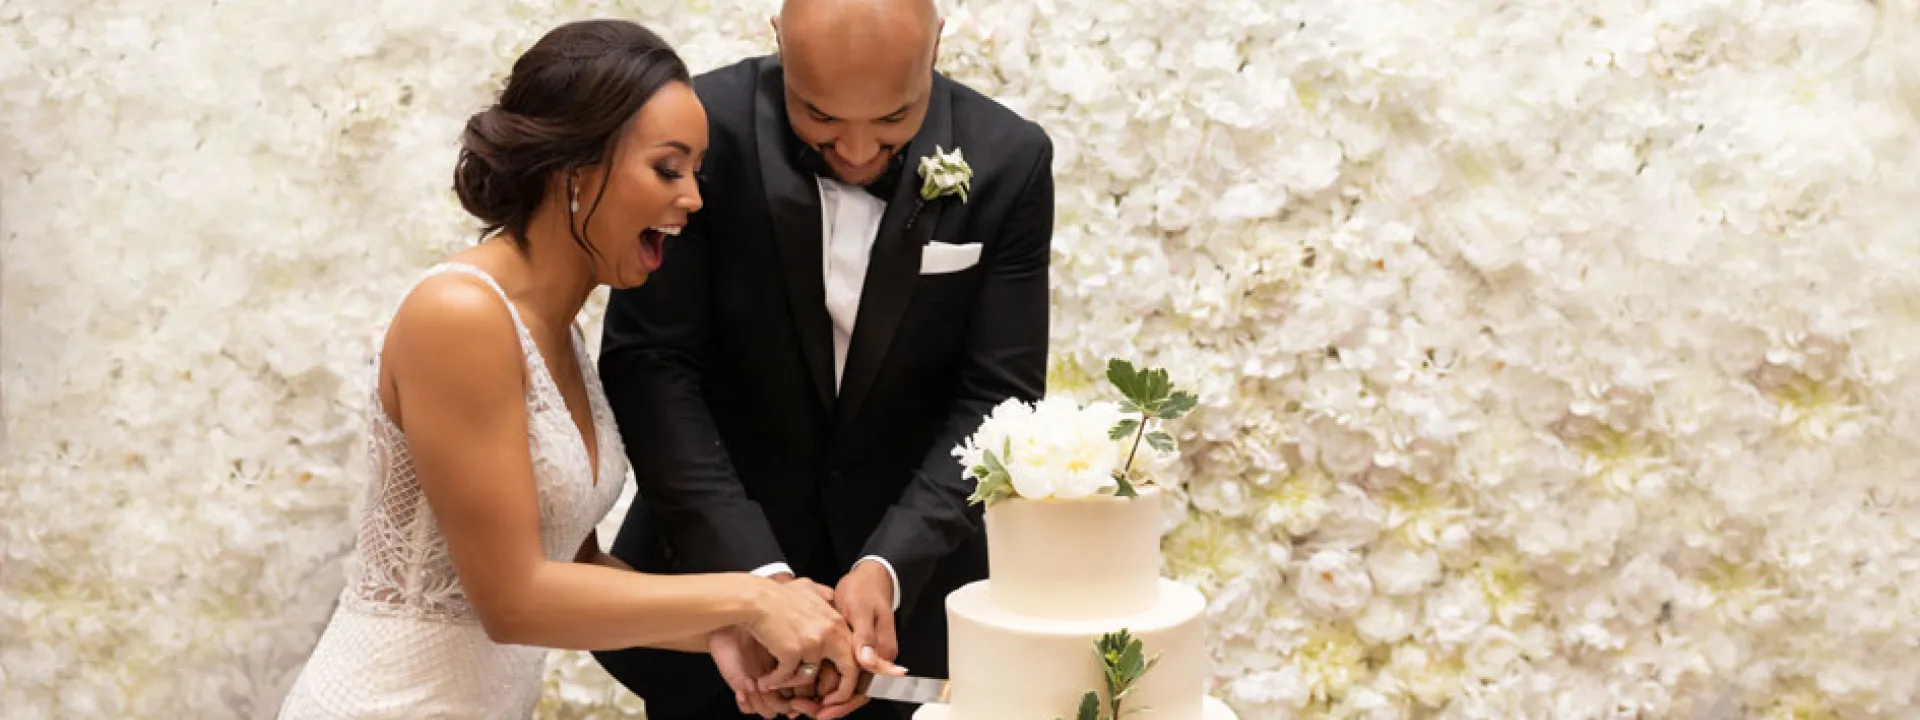 The bride cuts the cake with the groom (former Minnesota Vikings player Michael Floyd).